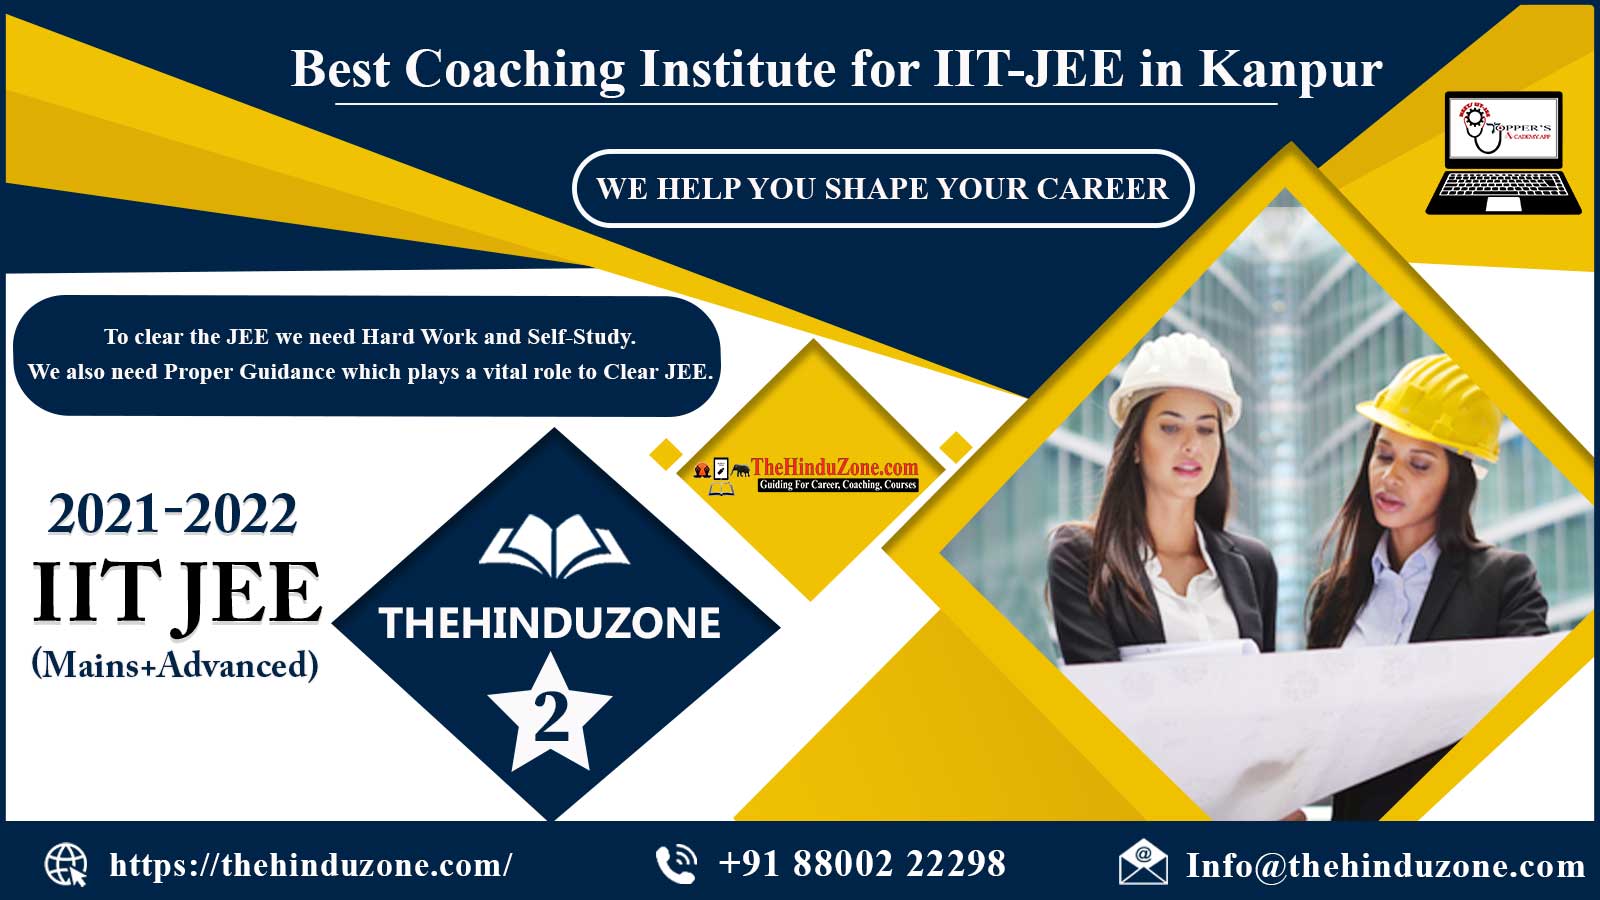 The Hinduzone IIT JEE Coaching in Kanpur